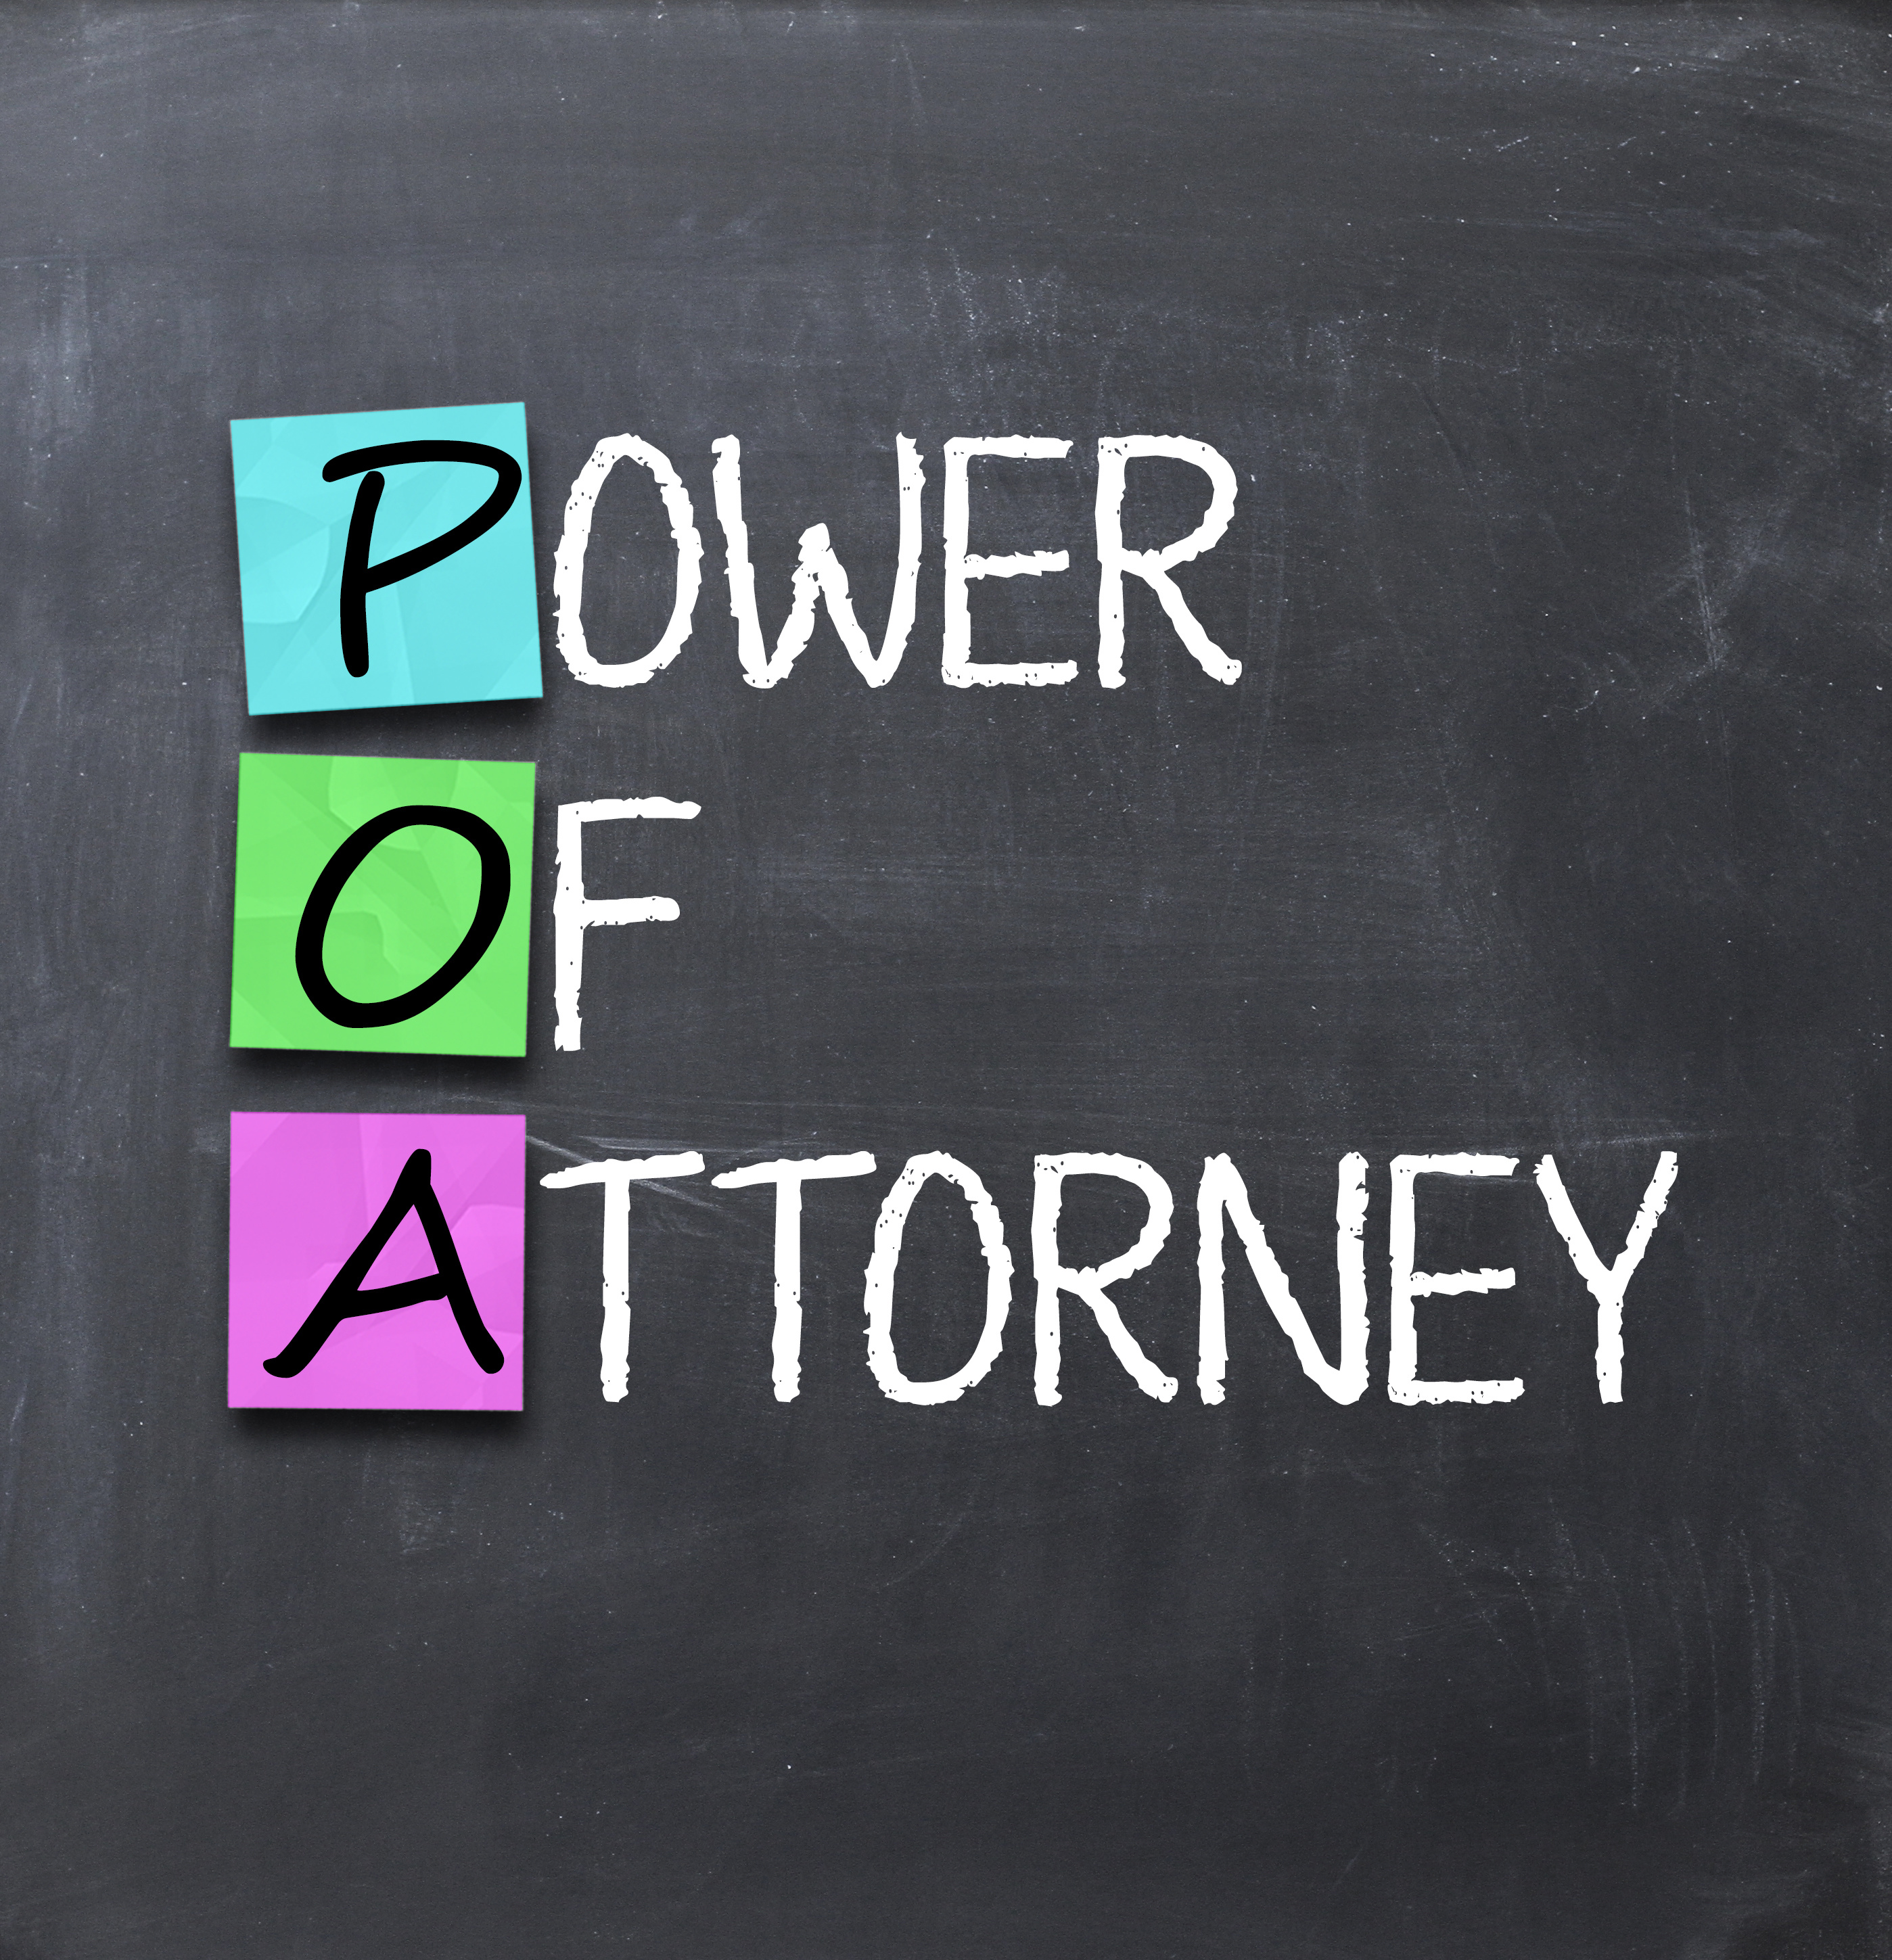 Should a Power of Attorney be a part of my Estate Plan?